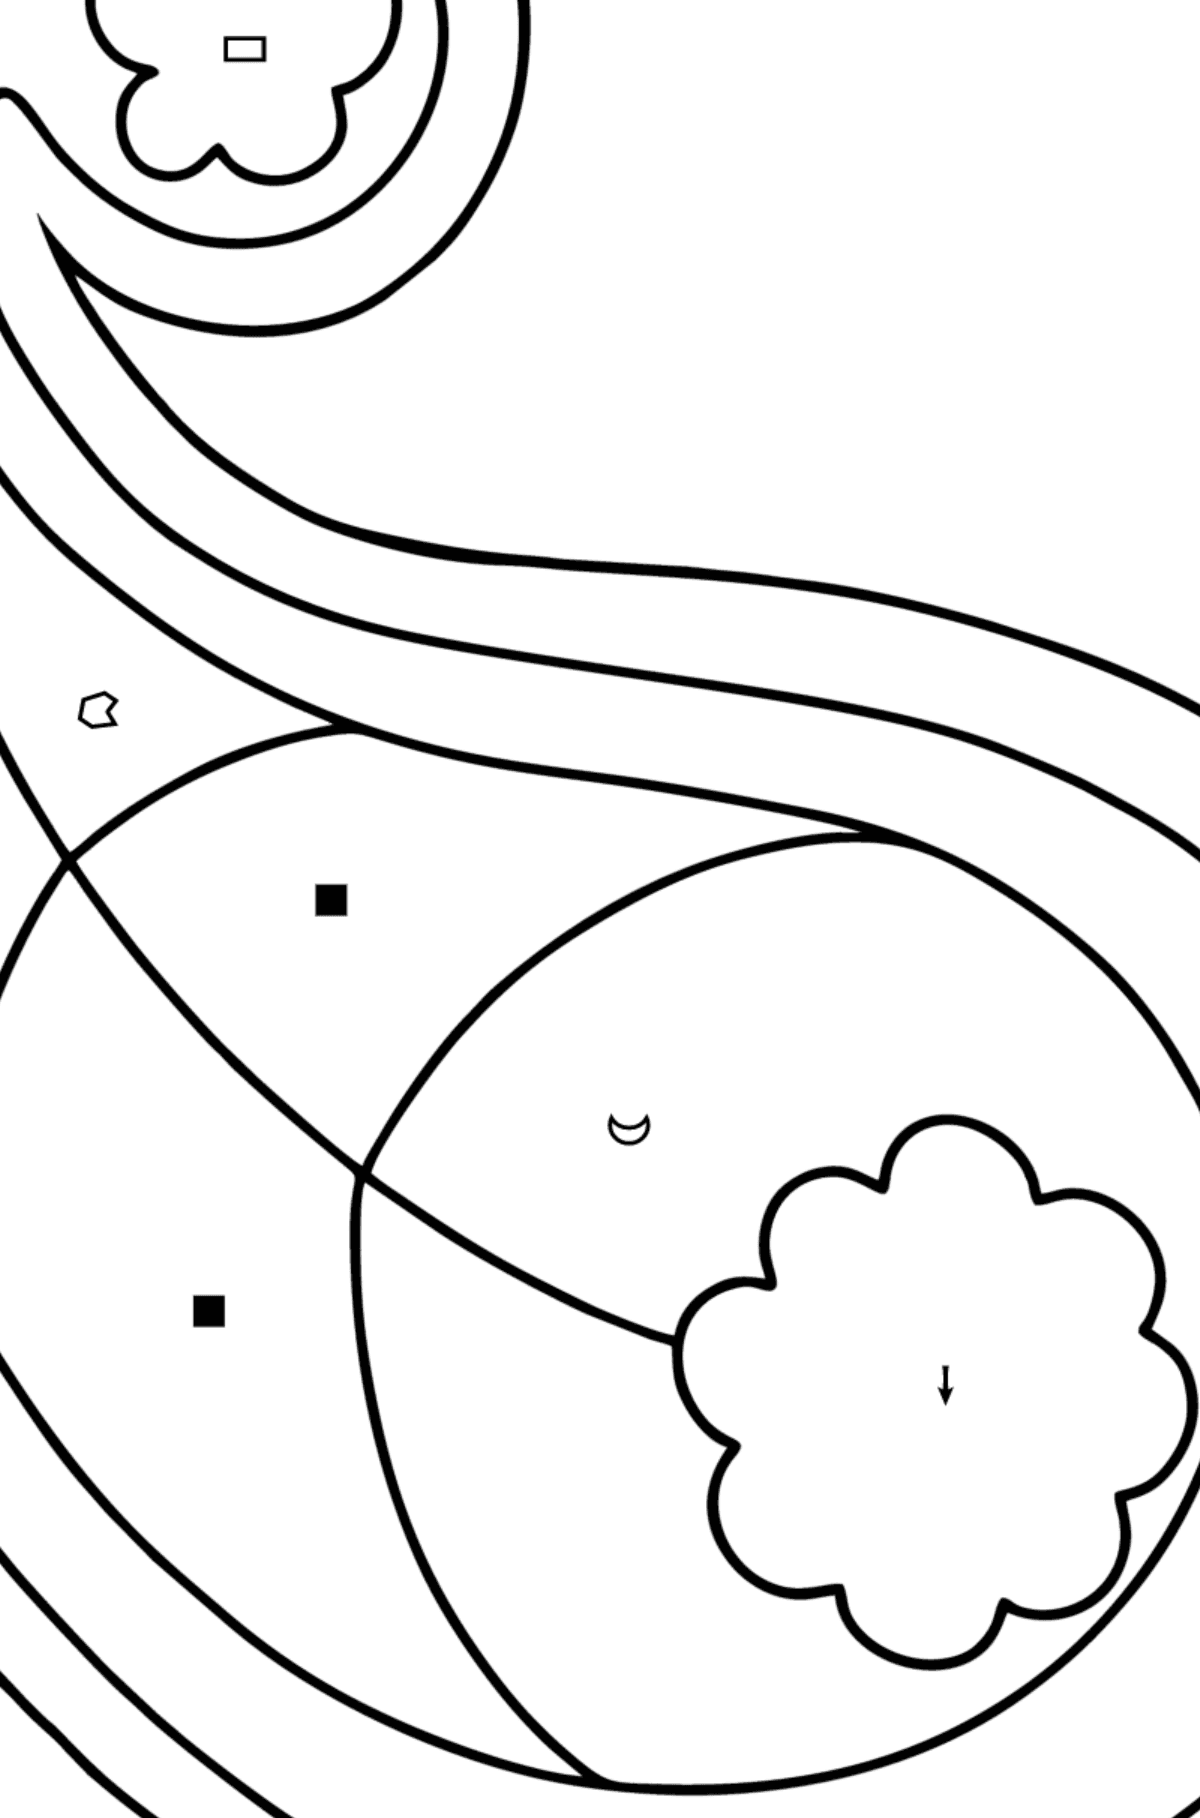 Simple Paisley coloring page - Coloring by Symbols and Geometric Shapes for Kids